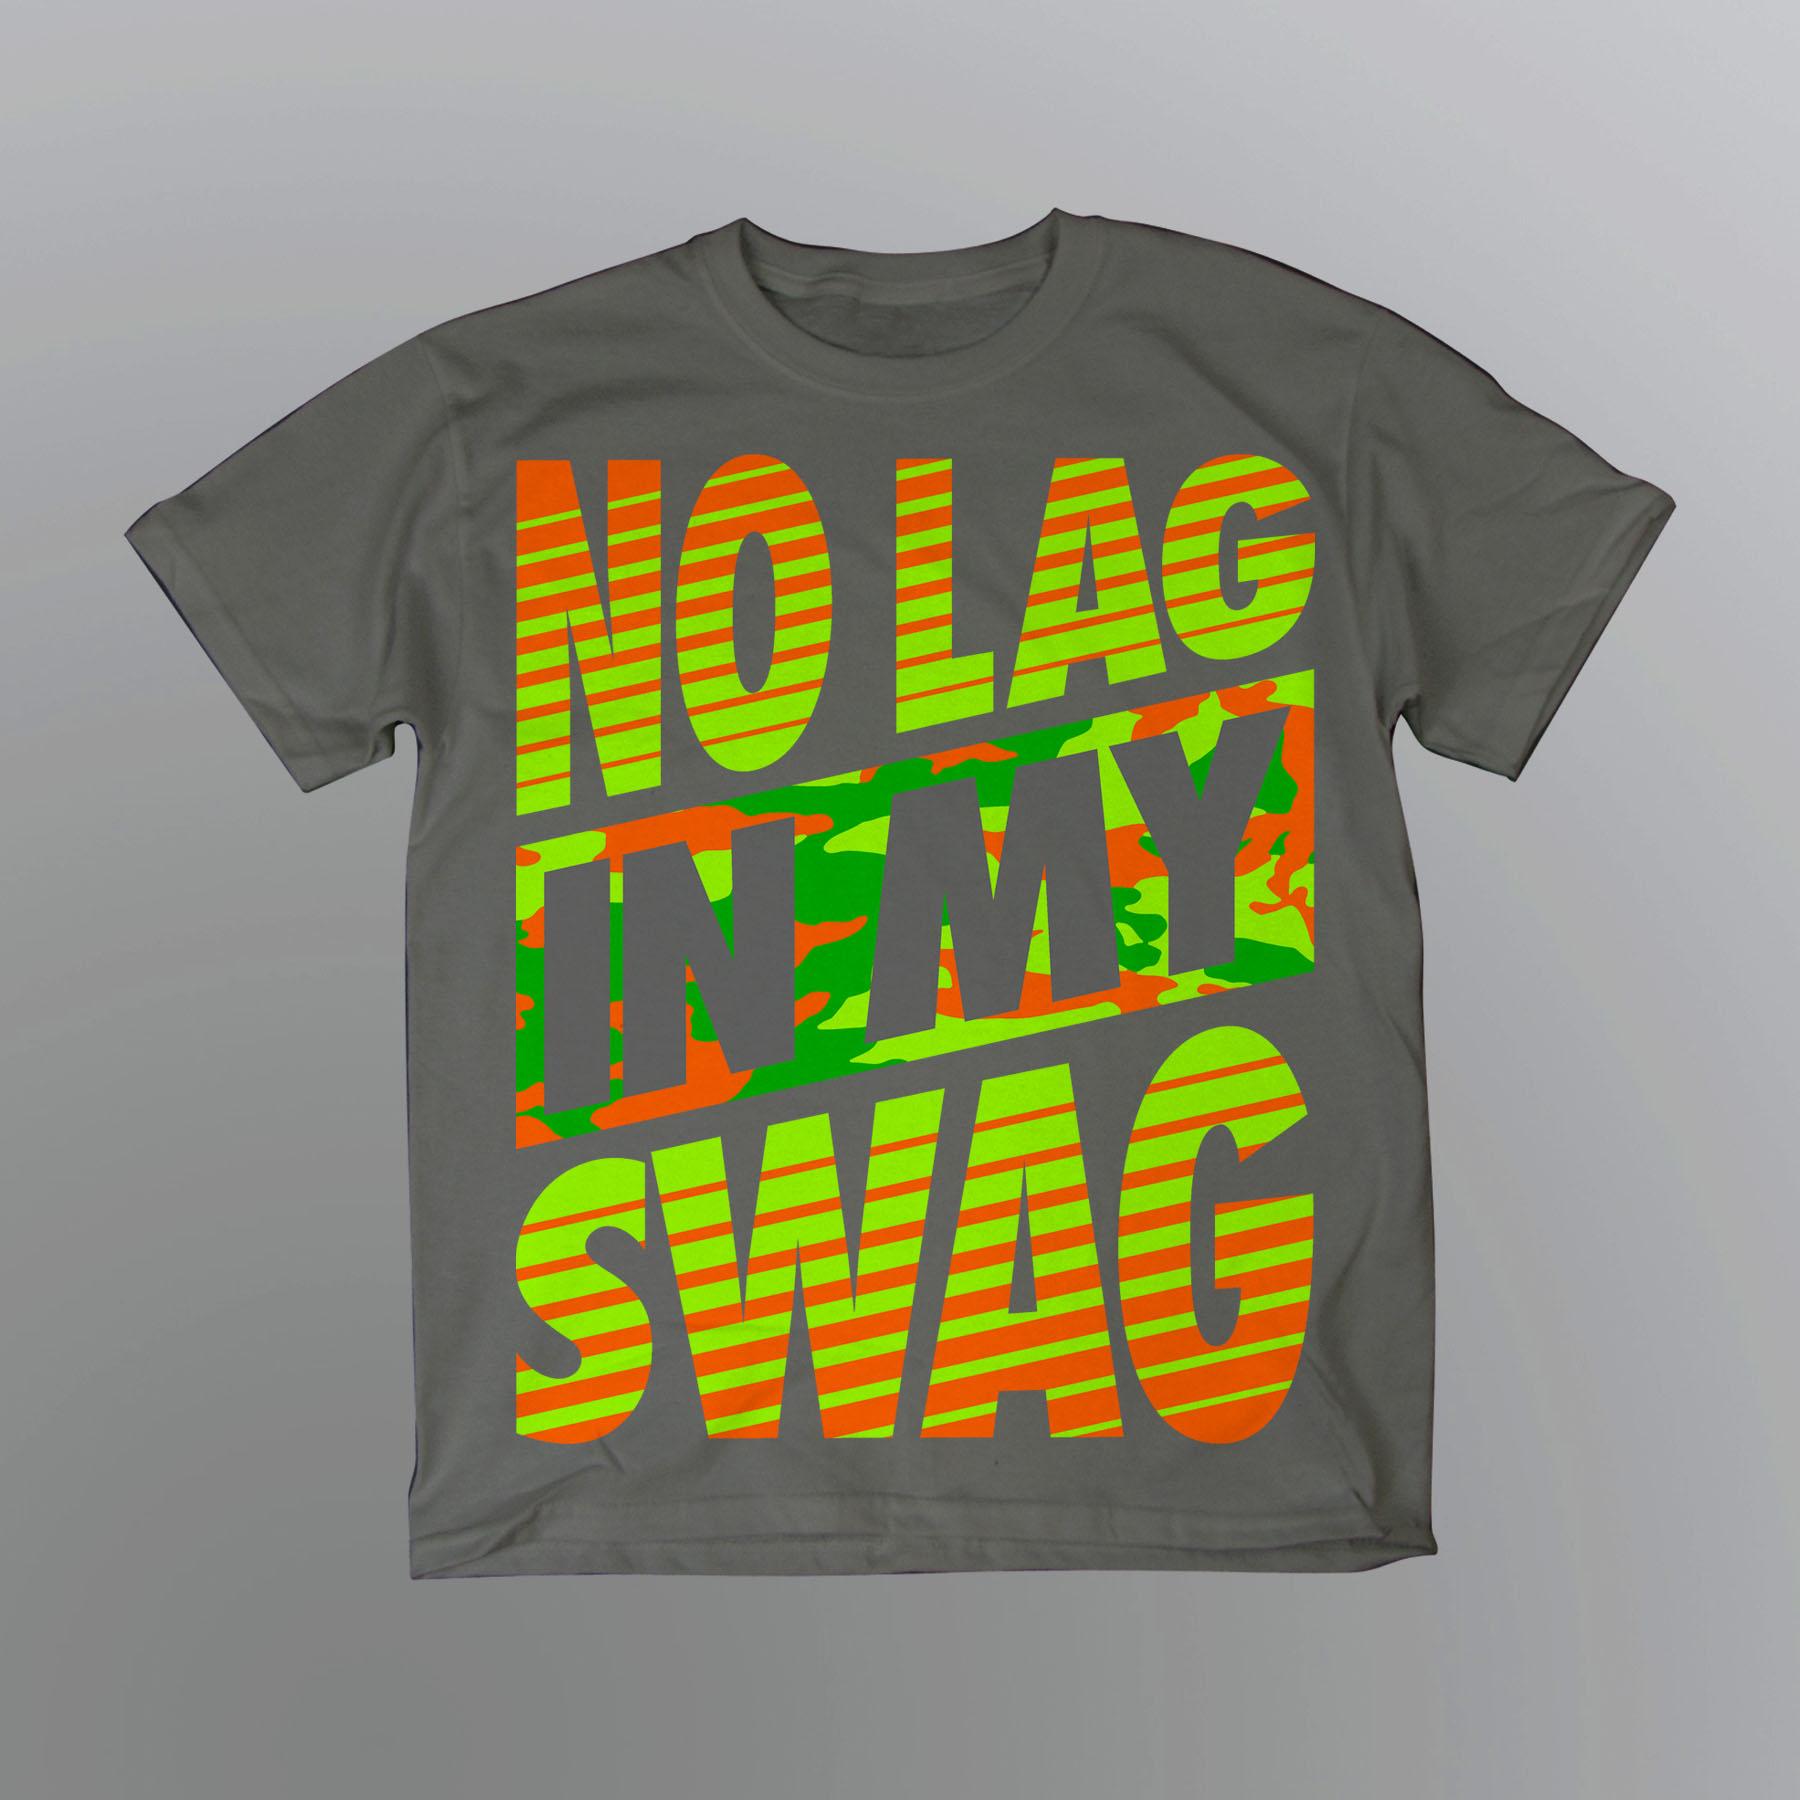 Boy's Graphic T-Shirt - No Lag In My Swag